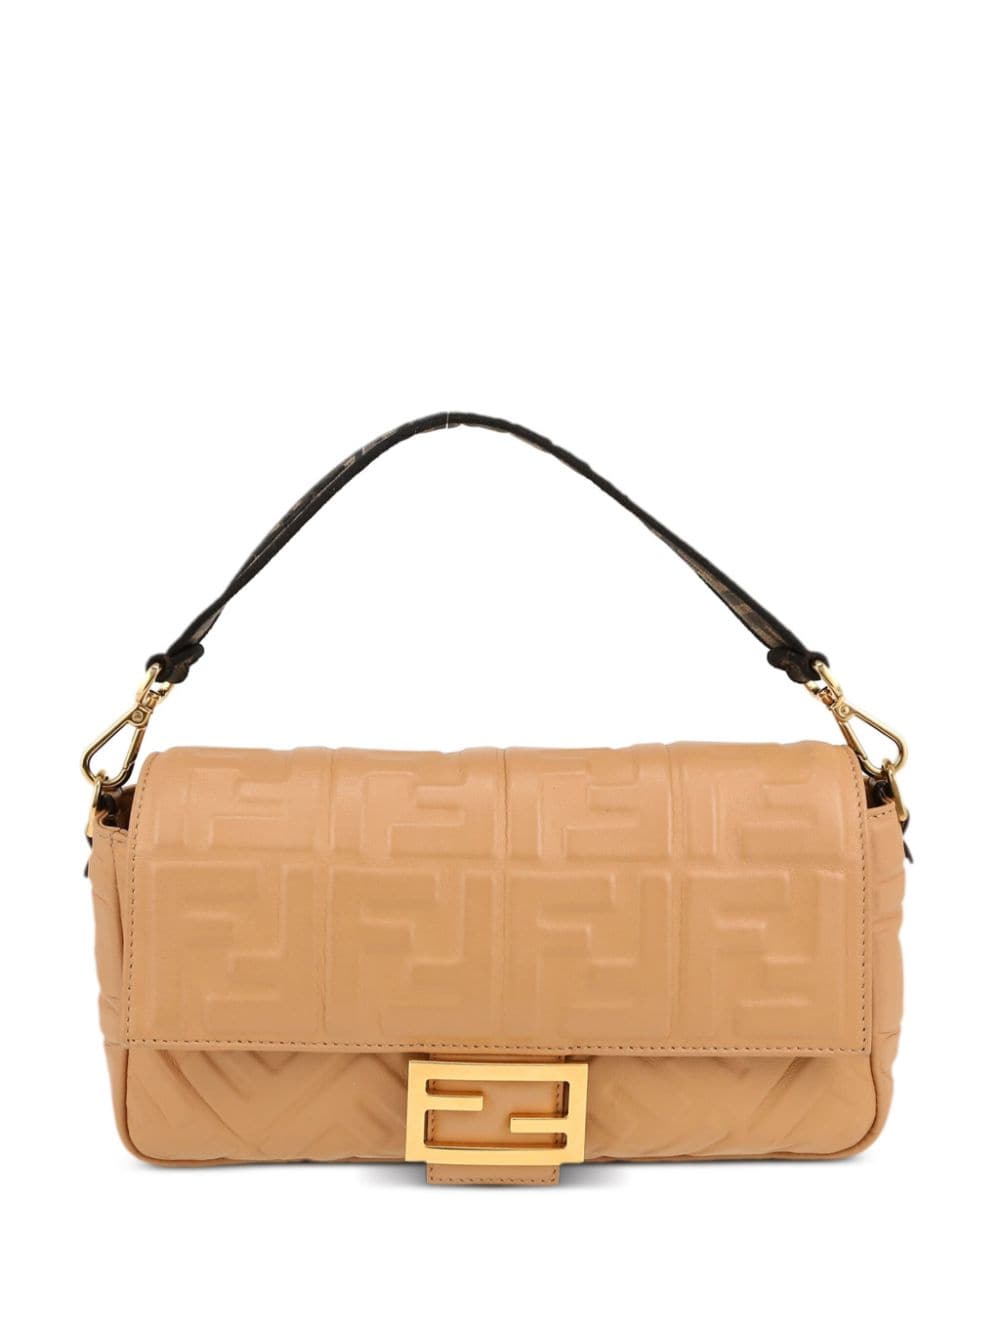 Fendi Pre-Owned 2020 Baguette leather two-way bag - Neutrals von Fendi Pre-Owned